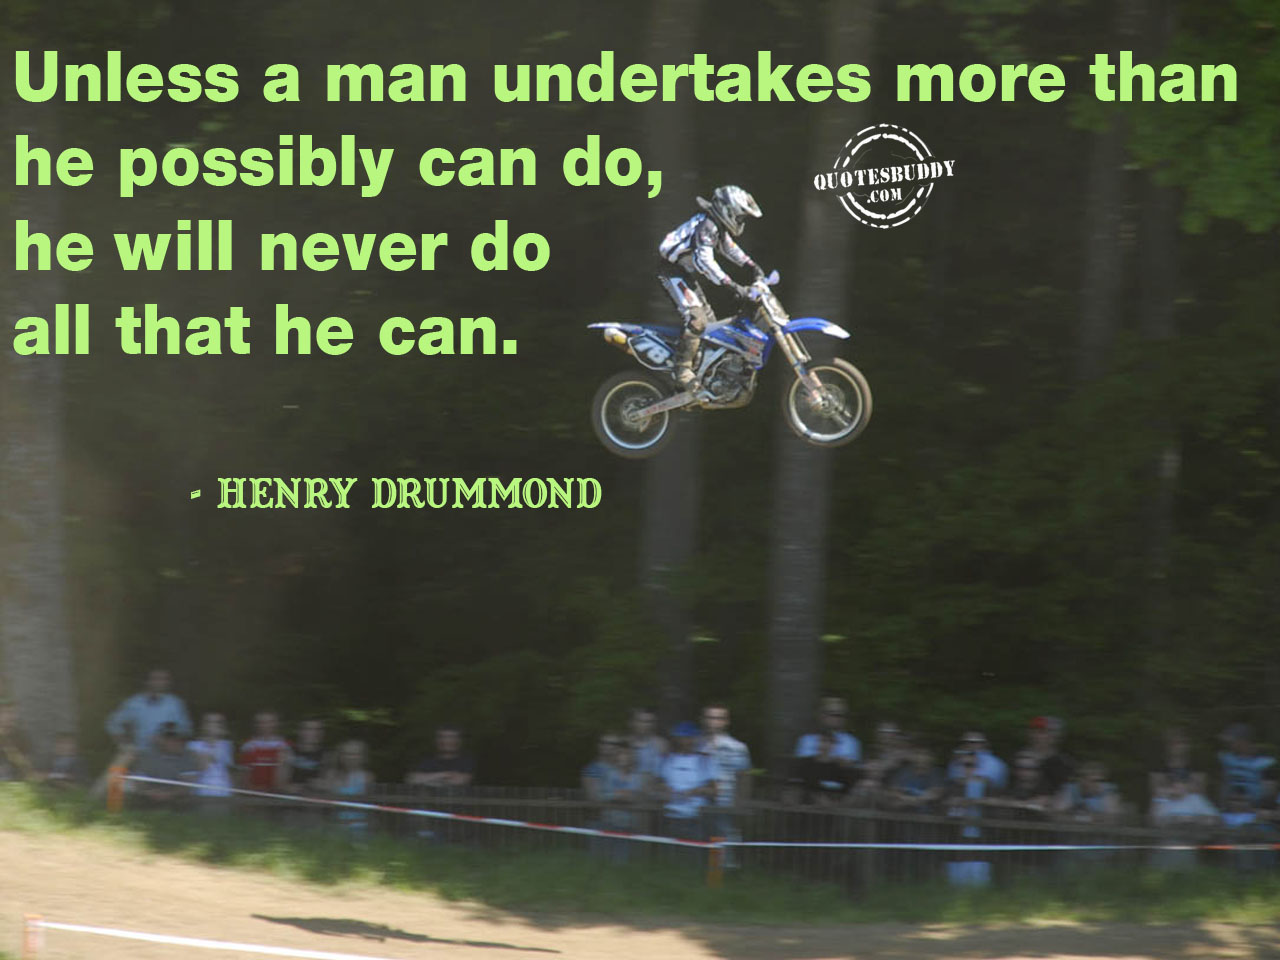 Unless a man undertakes more than he possibly can do, he will never do all he can do. – Henry Drummond